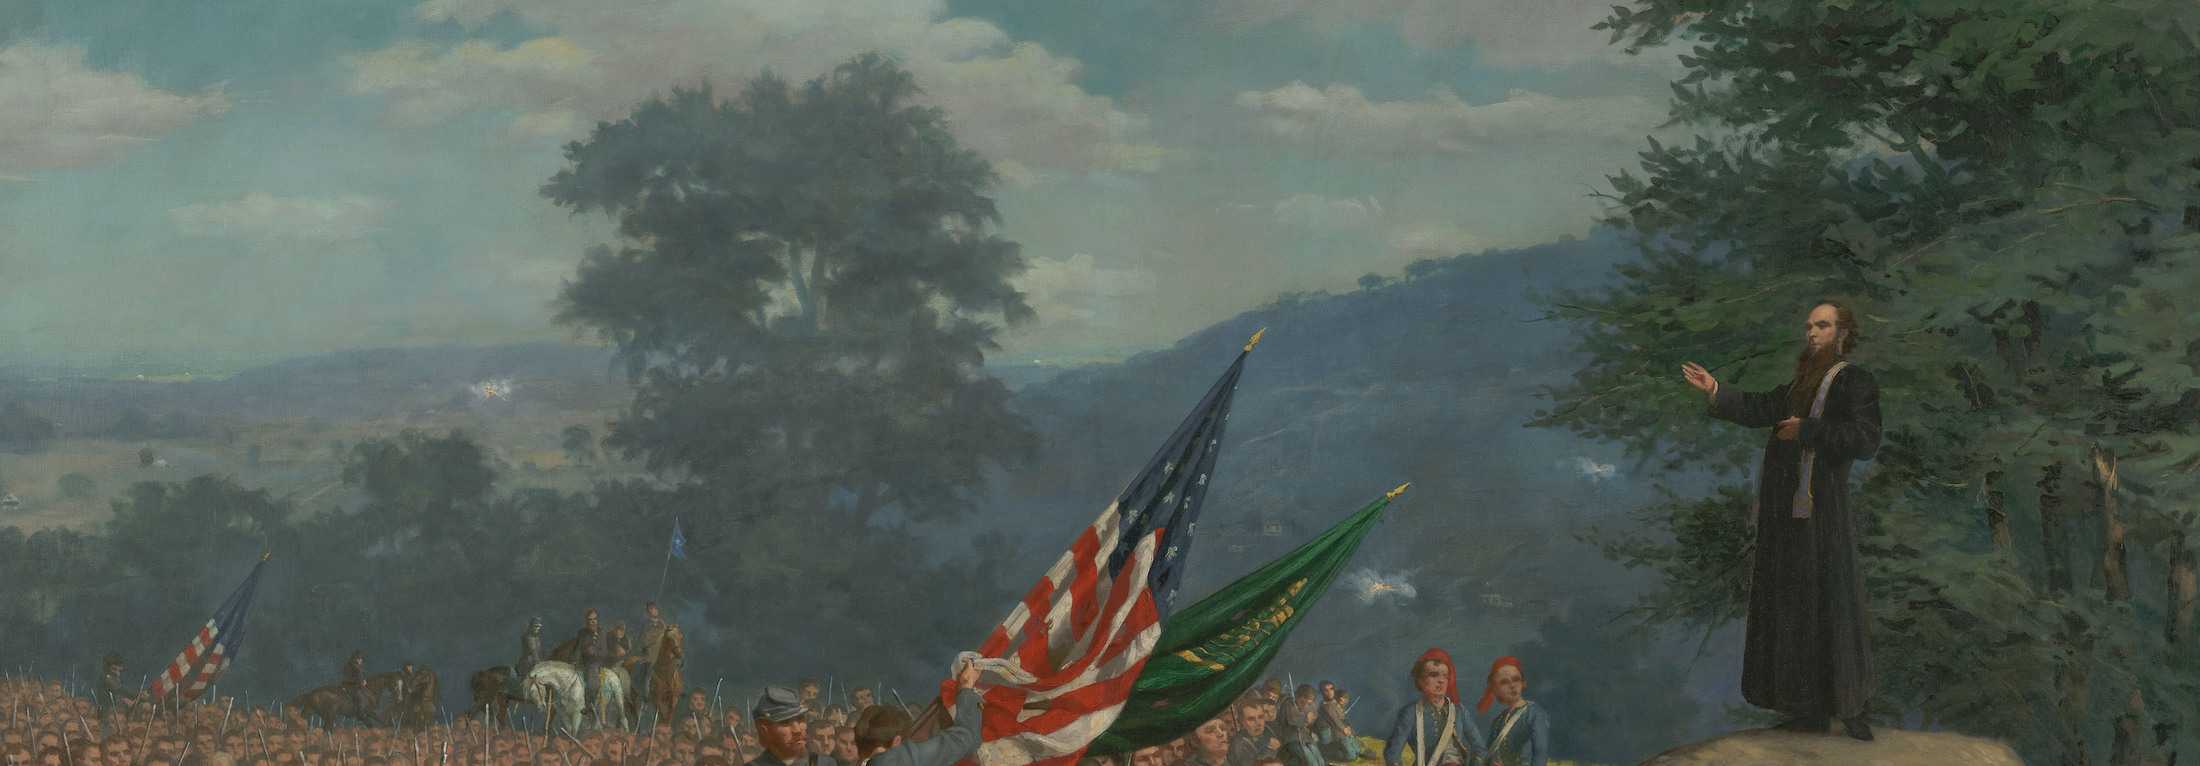 Painting Absolution Underfire by Paul Henry Wood. The painting captures the dramatic moment before the fighting started when Rev. William J. Corby, C.S.C., then chaplain of the 88th New York Regiment, one of five regiments in the legendary Irish Brigade, stood upon a boulder and addressed the troops. Exposing himself to enemy fire, with cannonballs exploding nearby and bullets whistling overhead, Corby exhorted the soldiers to remember the noble cause and sacred nature of their duty.